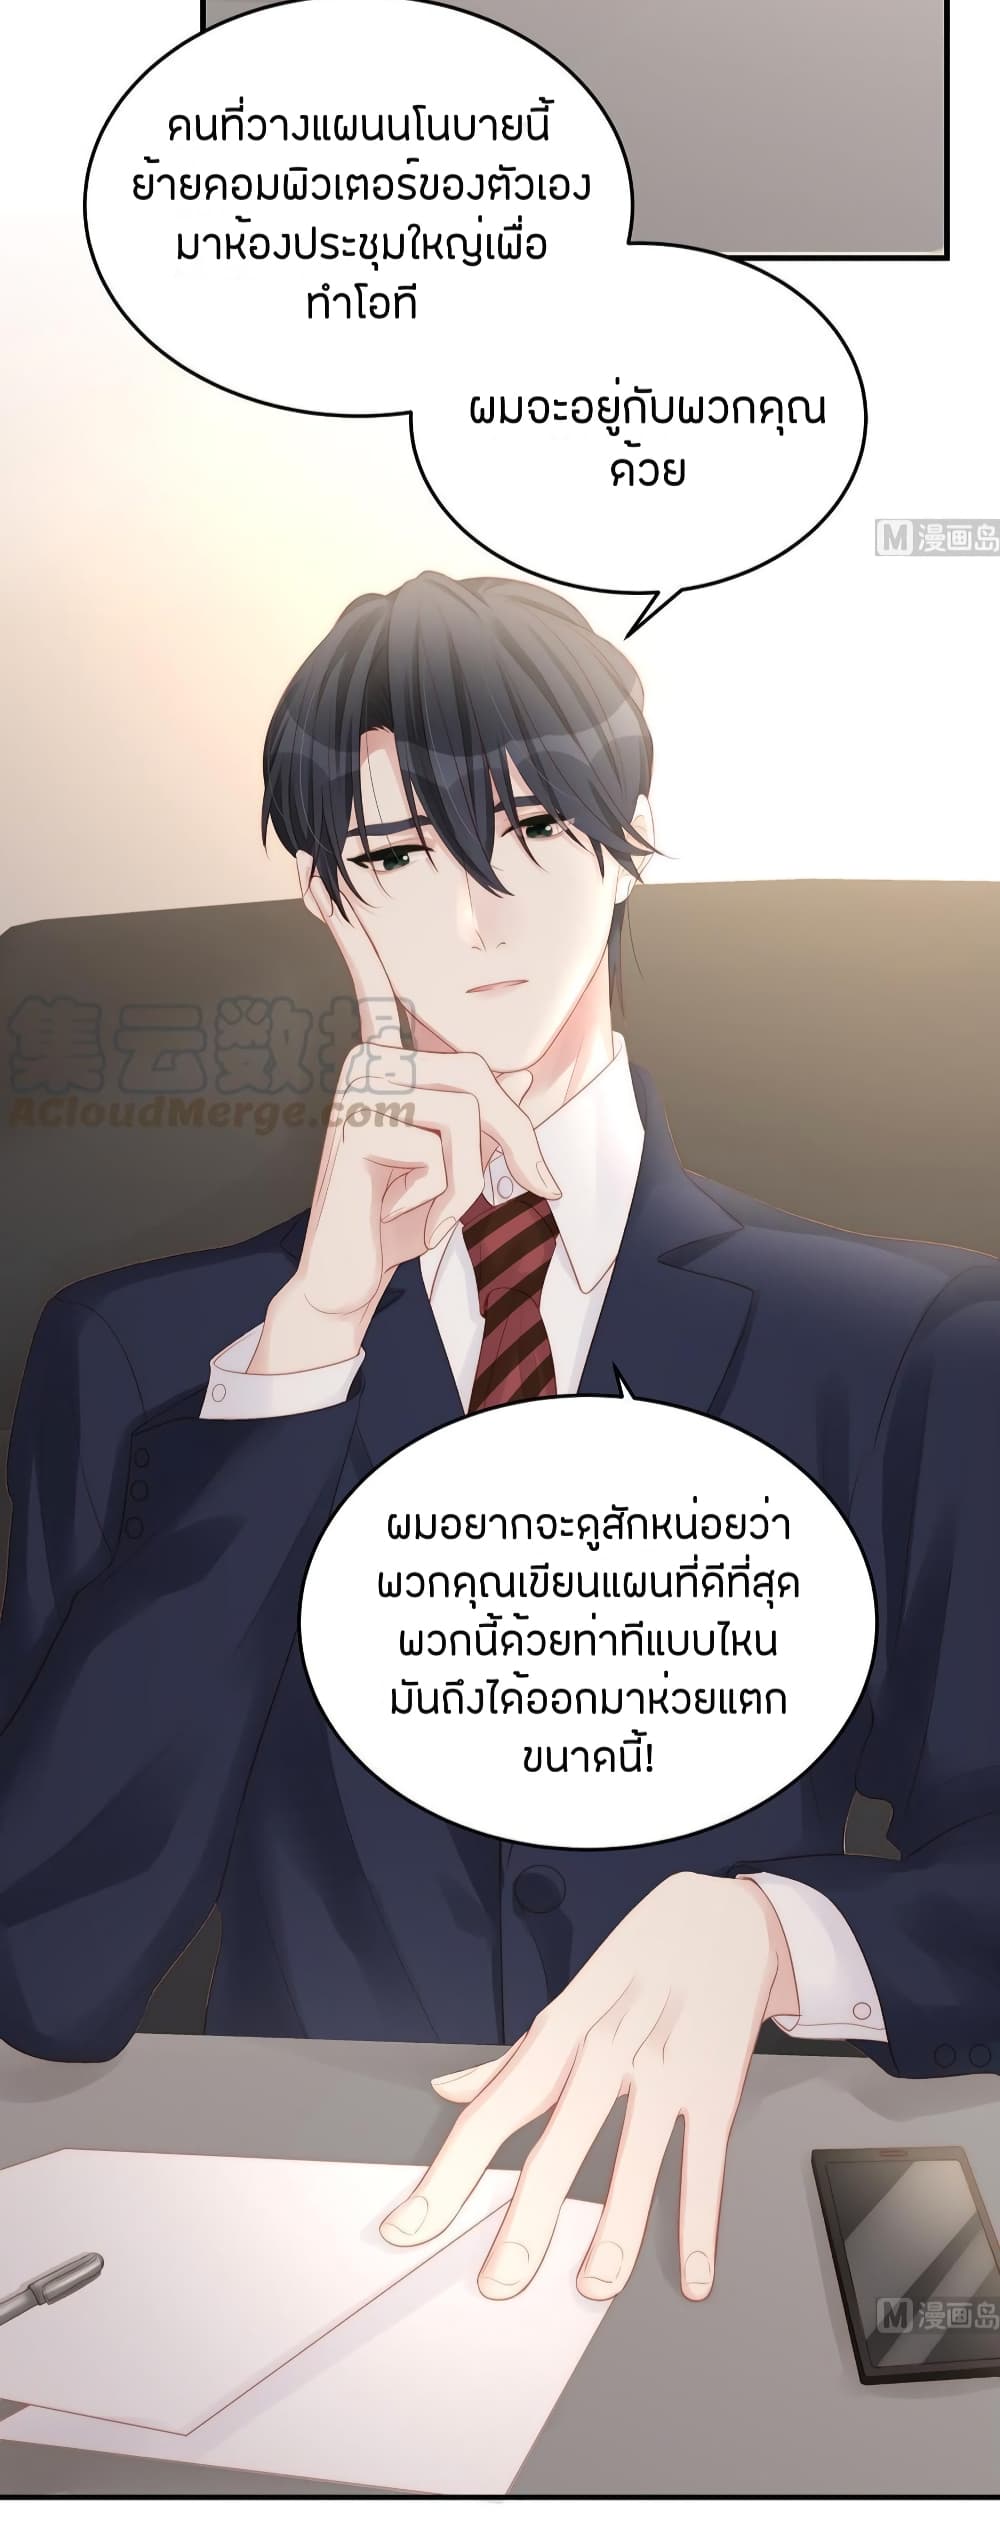 Gonna Spoil You ตอนที่ 81 (15)